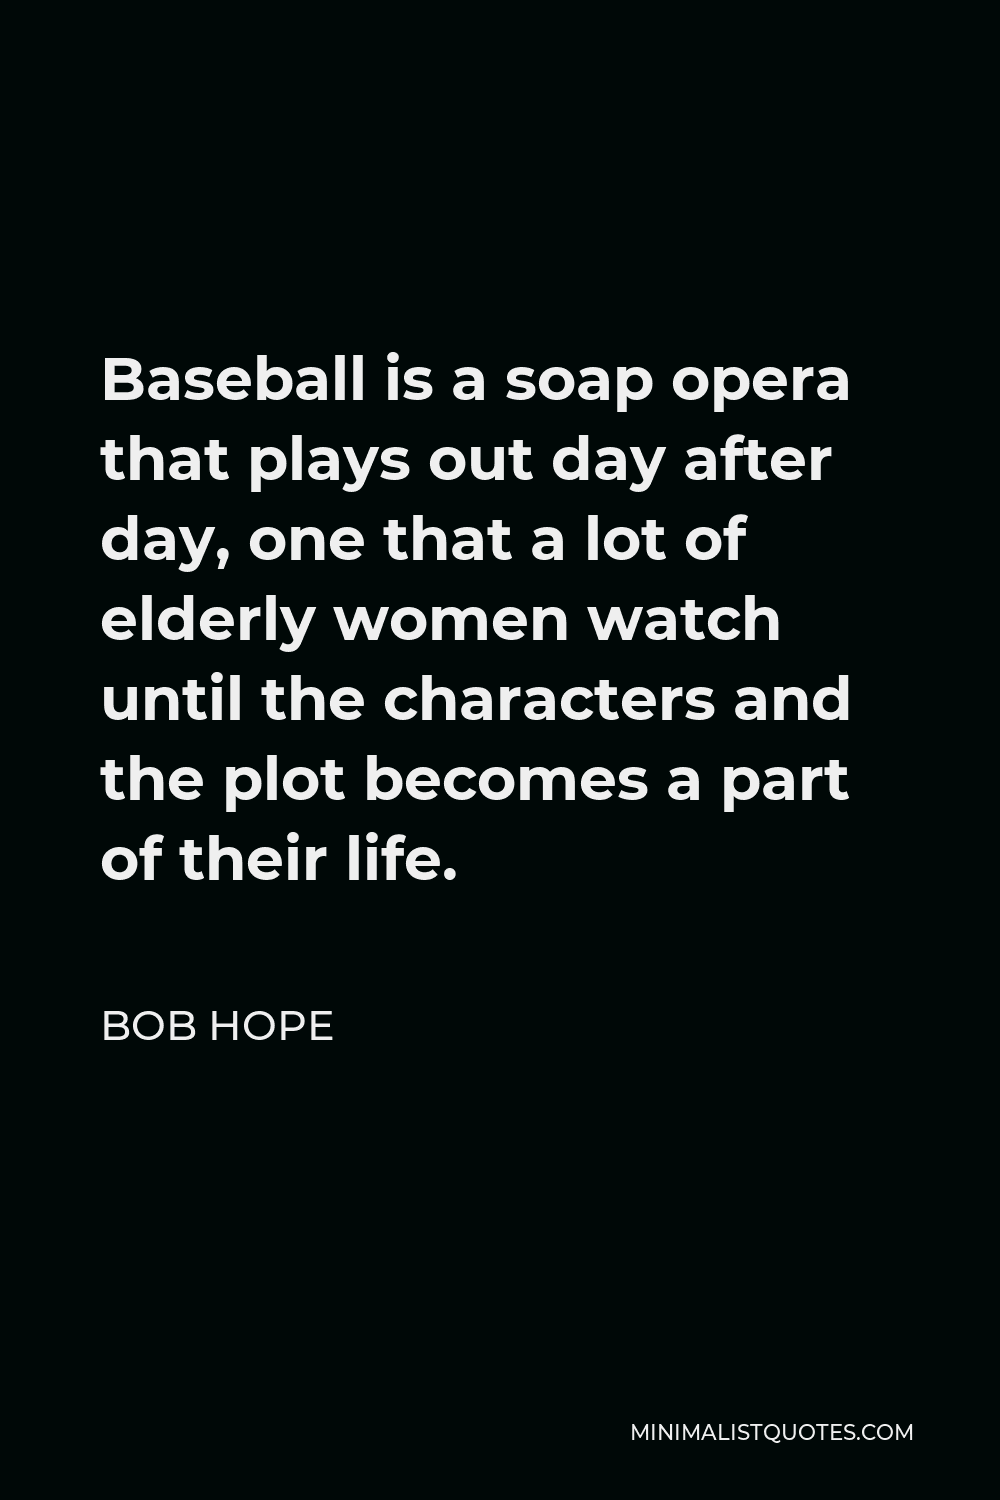 Bob Hope Quote - Baseball is a soap opera that plays out day after day, one that a lot of elderly women watch until the characters and the plot becomes a part of their life.